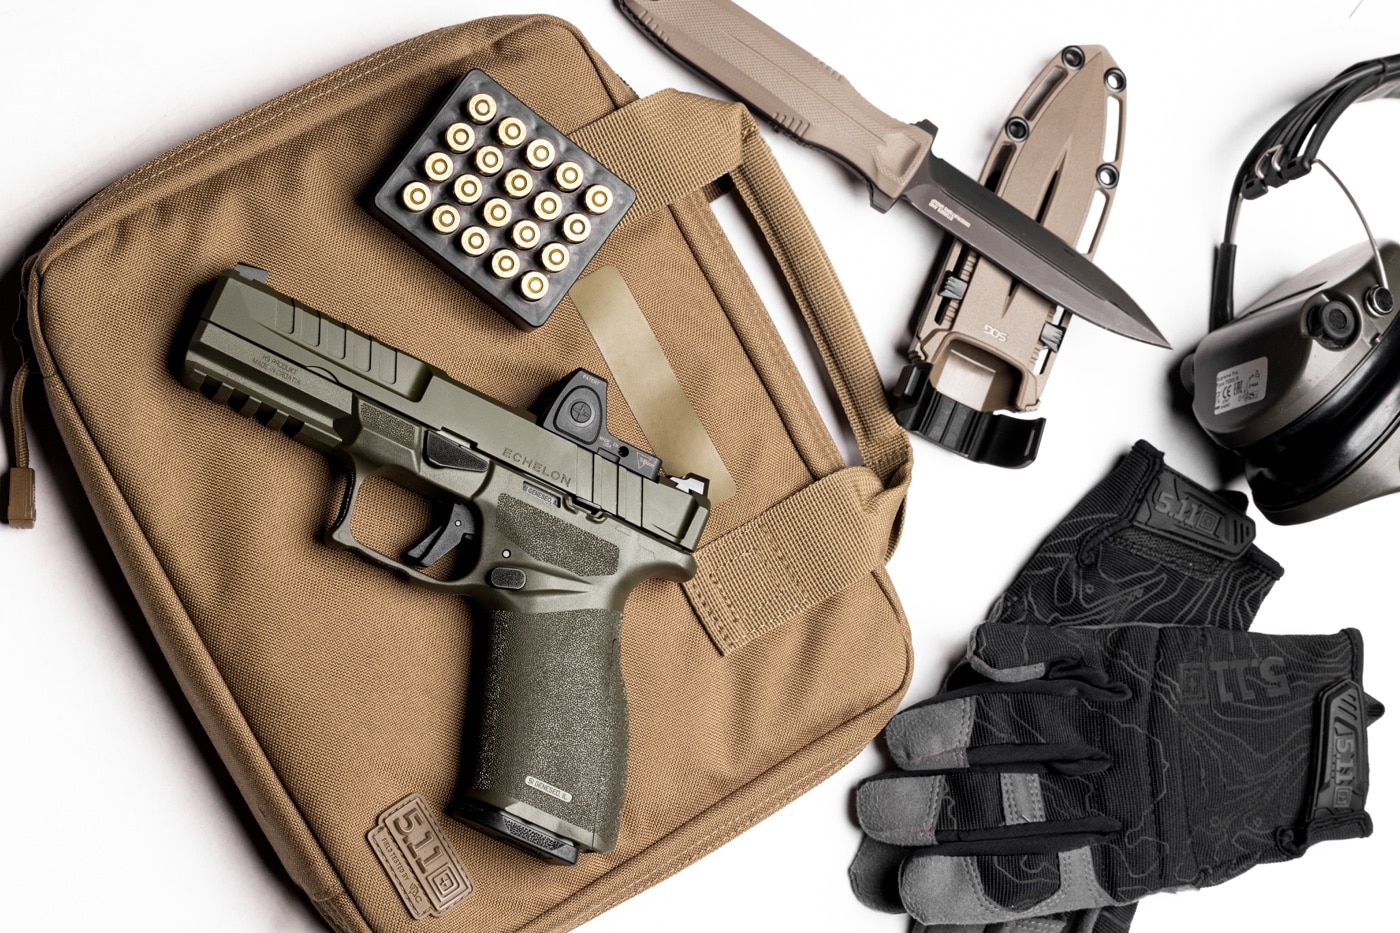 In this photograph, we see the new Springfield Armory Echelon in OD Green along with a variety of shooting accessories that one might take to the shooting range. These include a semi-automatic pistol case, shooting gloves and hearing protection.